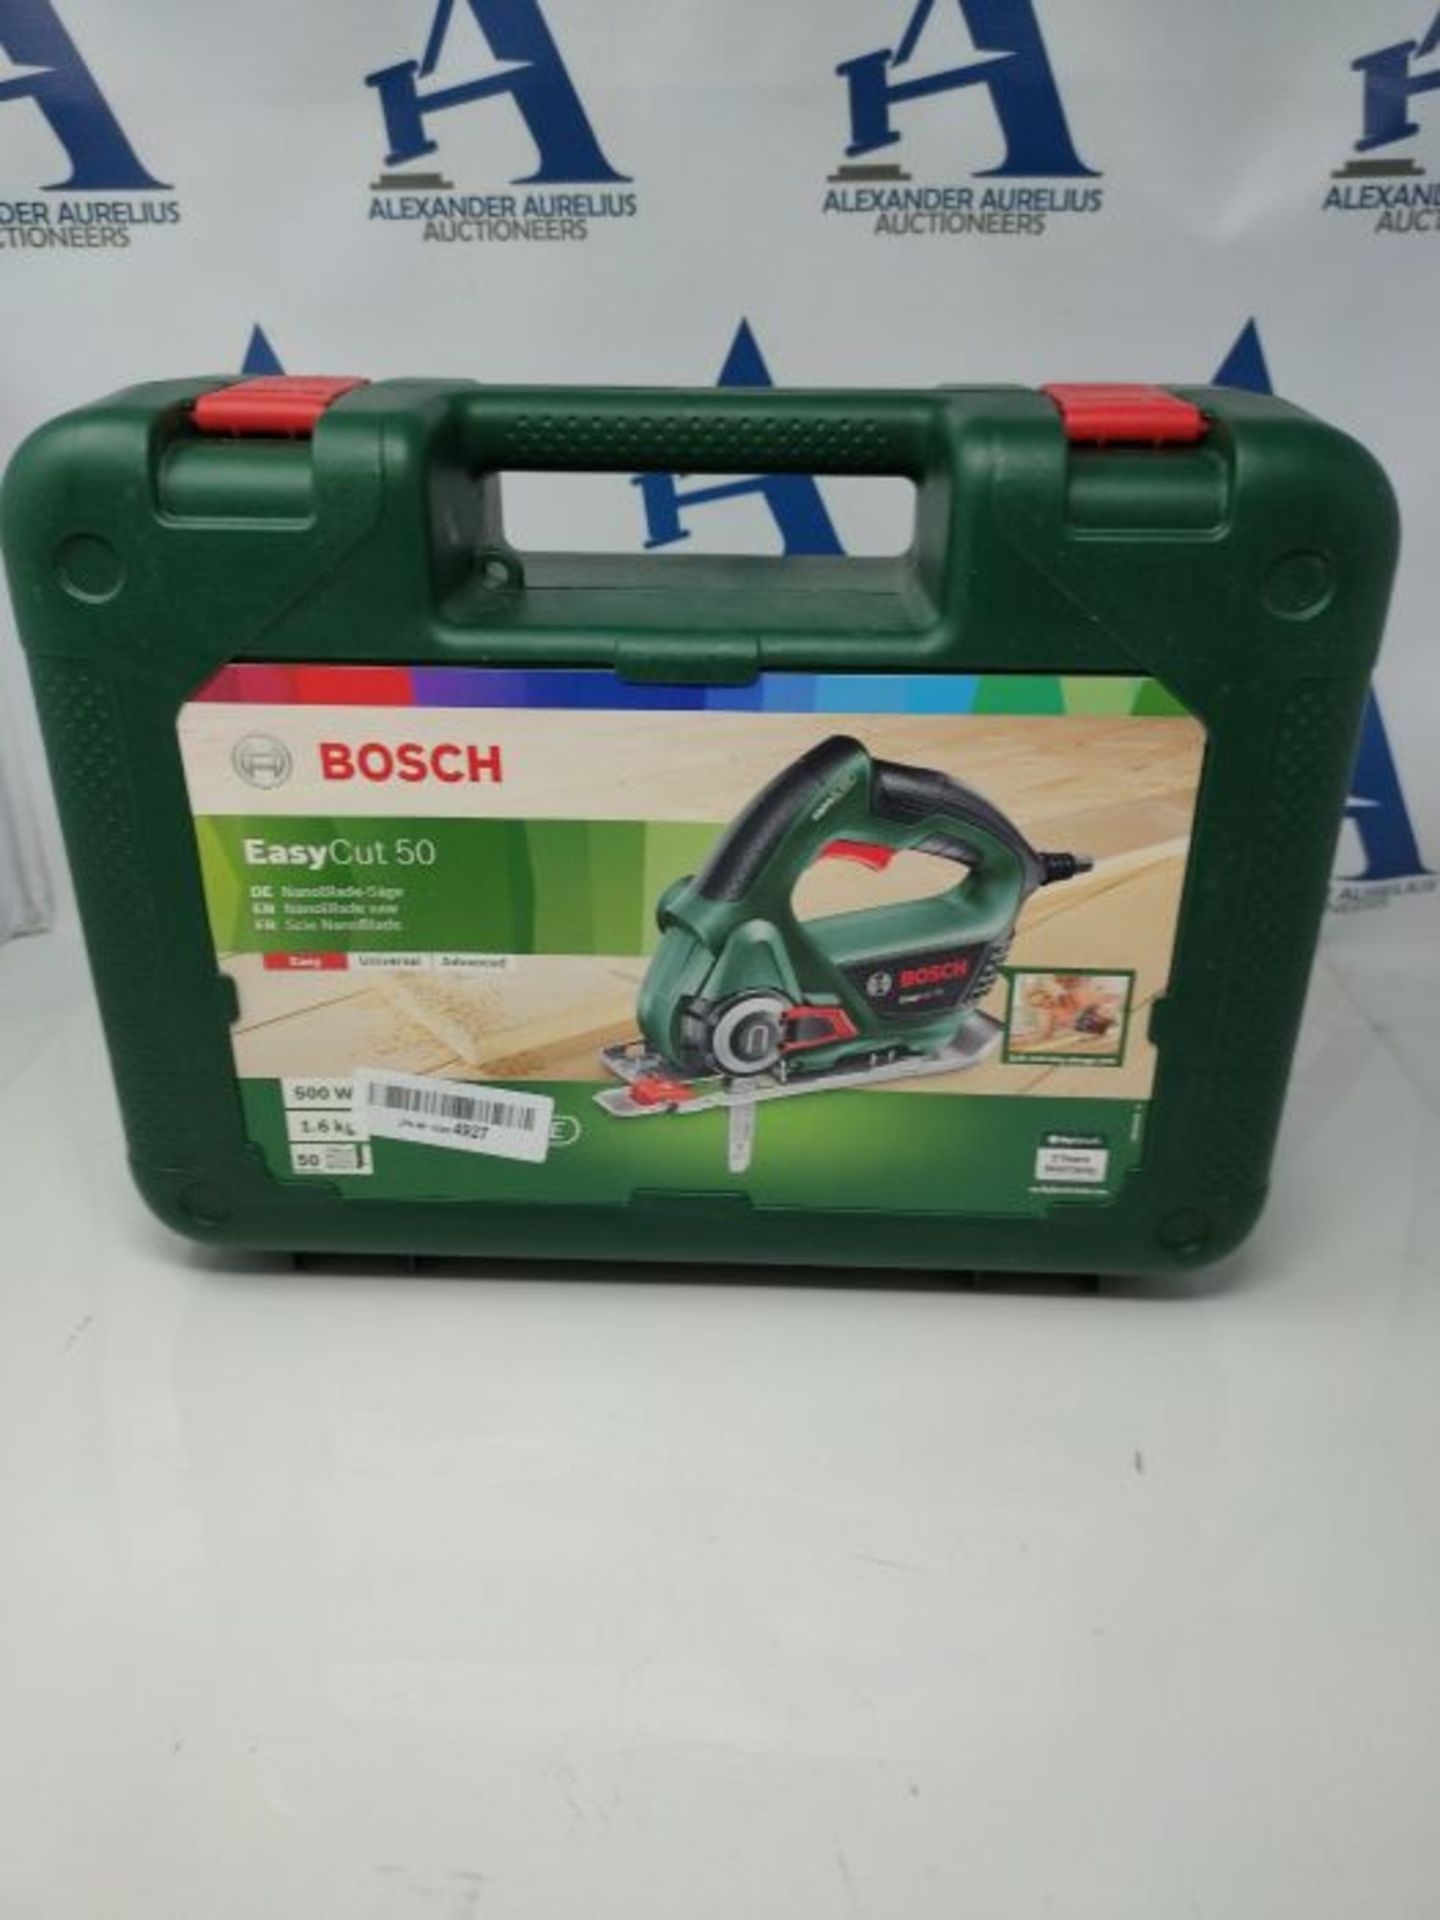 RRP £75.00 Bosch Home and Garden EasyCut 50 saw (500 W, NanoBlade technology, saw blade, protecti - Image 2 of 3